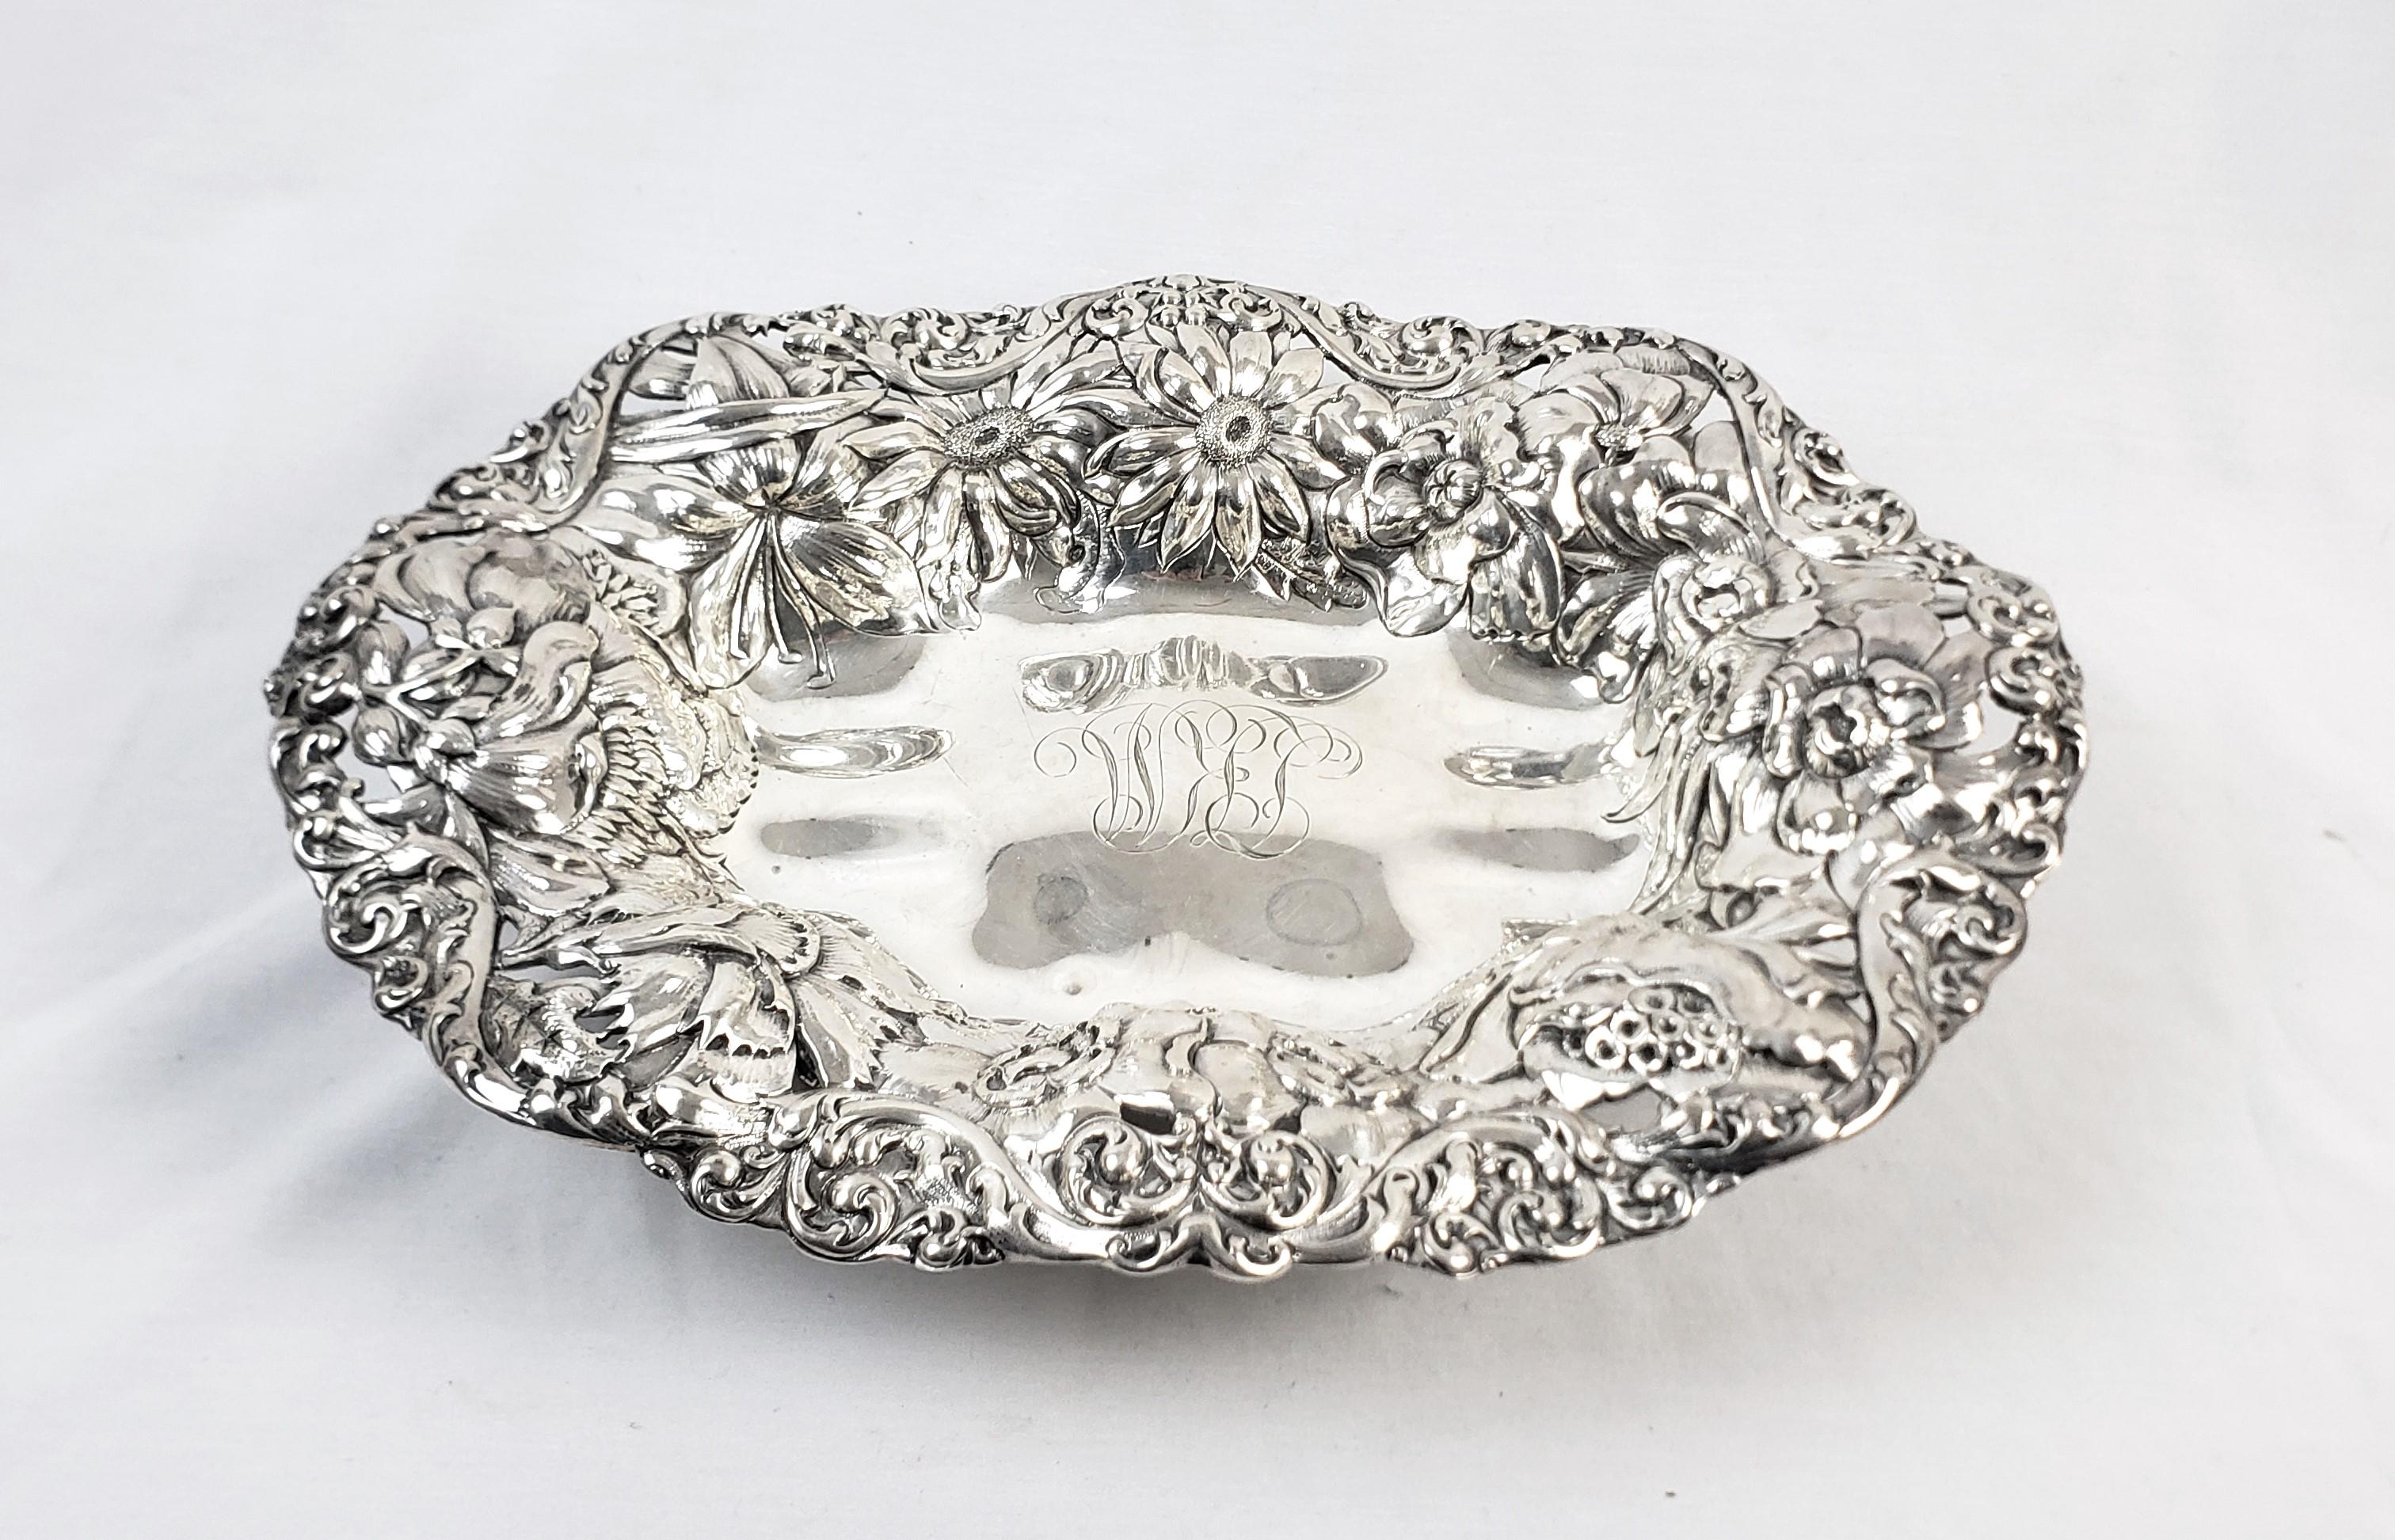 Antique Gorham Sterling Silver Bowl with Ornate Chased Floral Decoration In Good Condition For Sale In Hamilton, Ontario